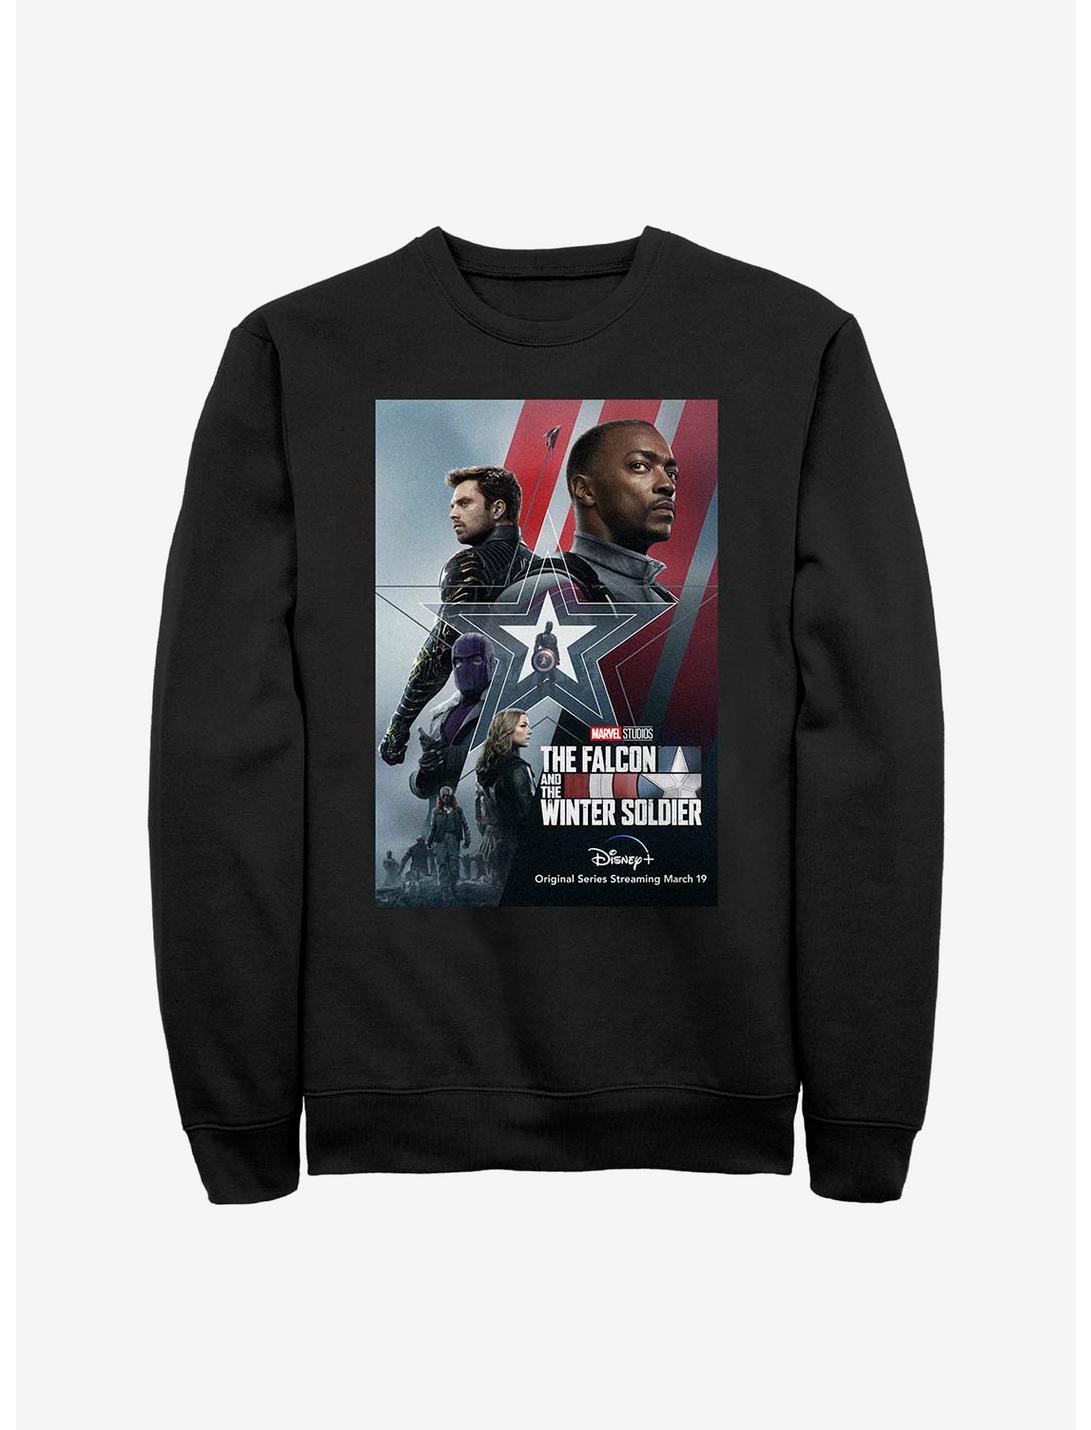 Marvel The Falcon And The Winter Soldier Partner Sweatshirt, BLACK, hi-res